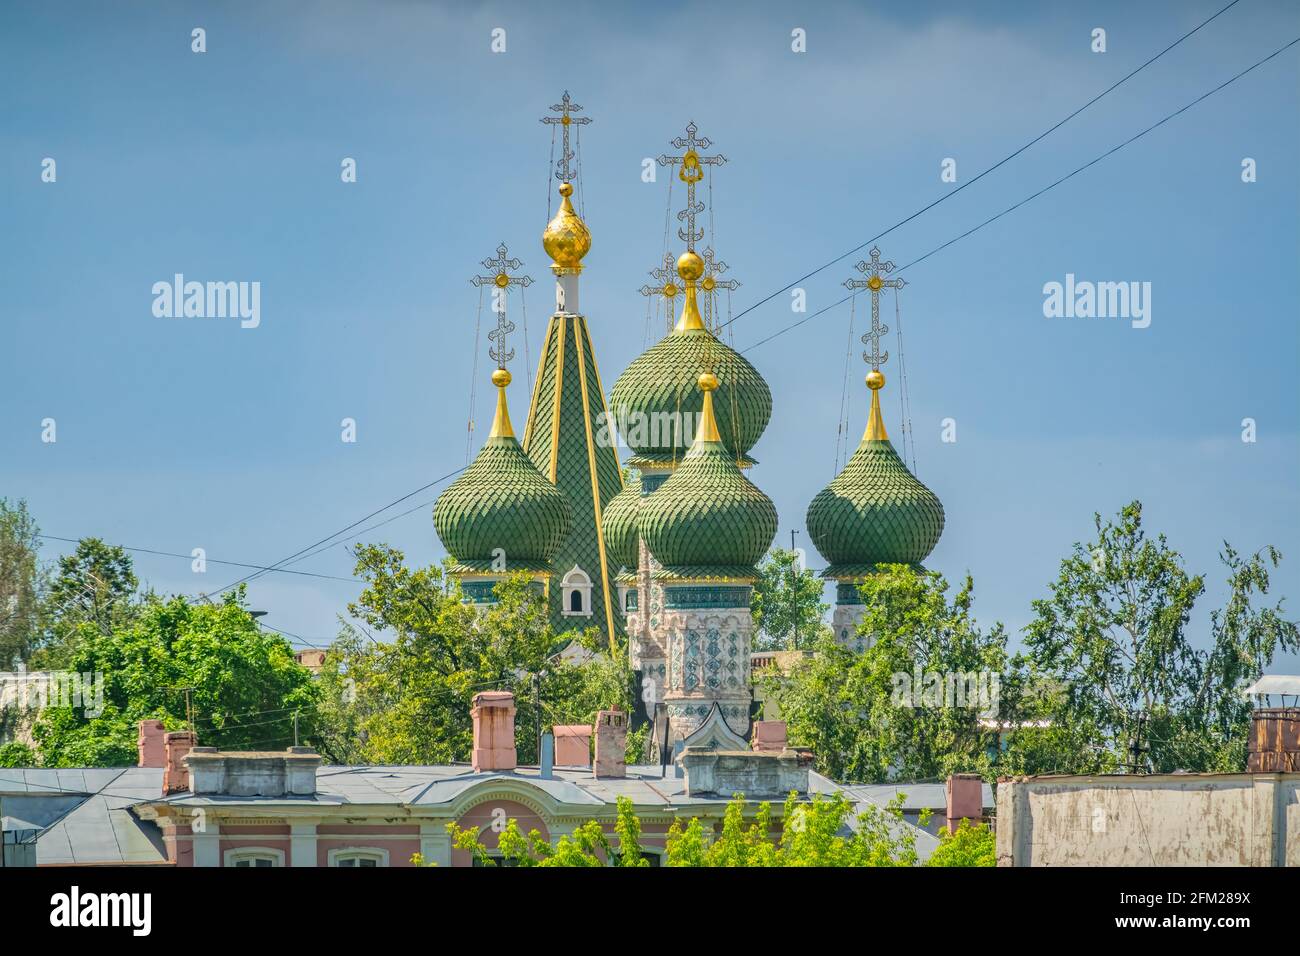 The Assumption Church with green onion dome towers in Nizhny Novgorod, Russia Stock Photo